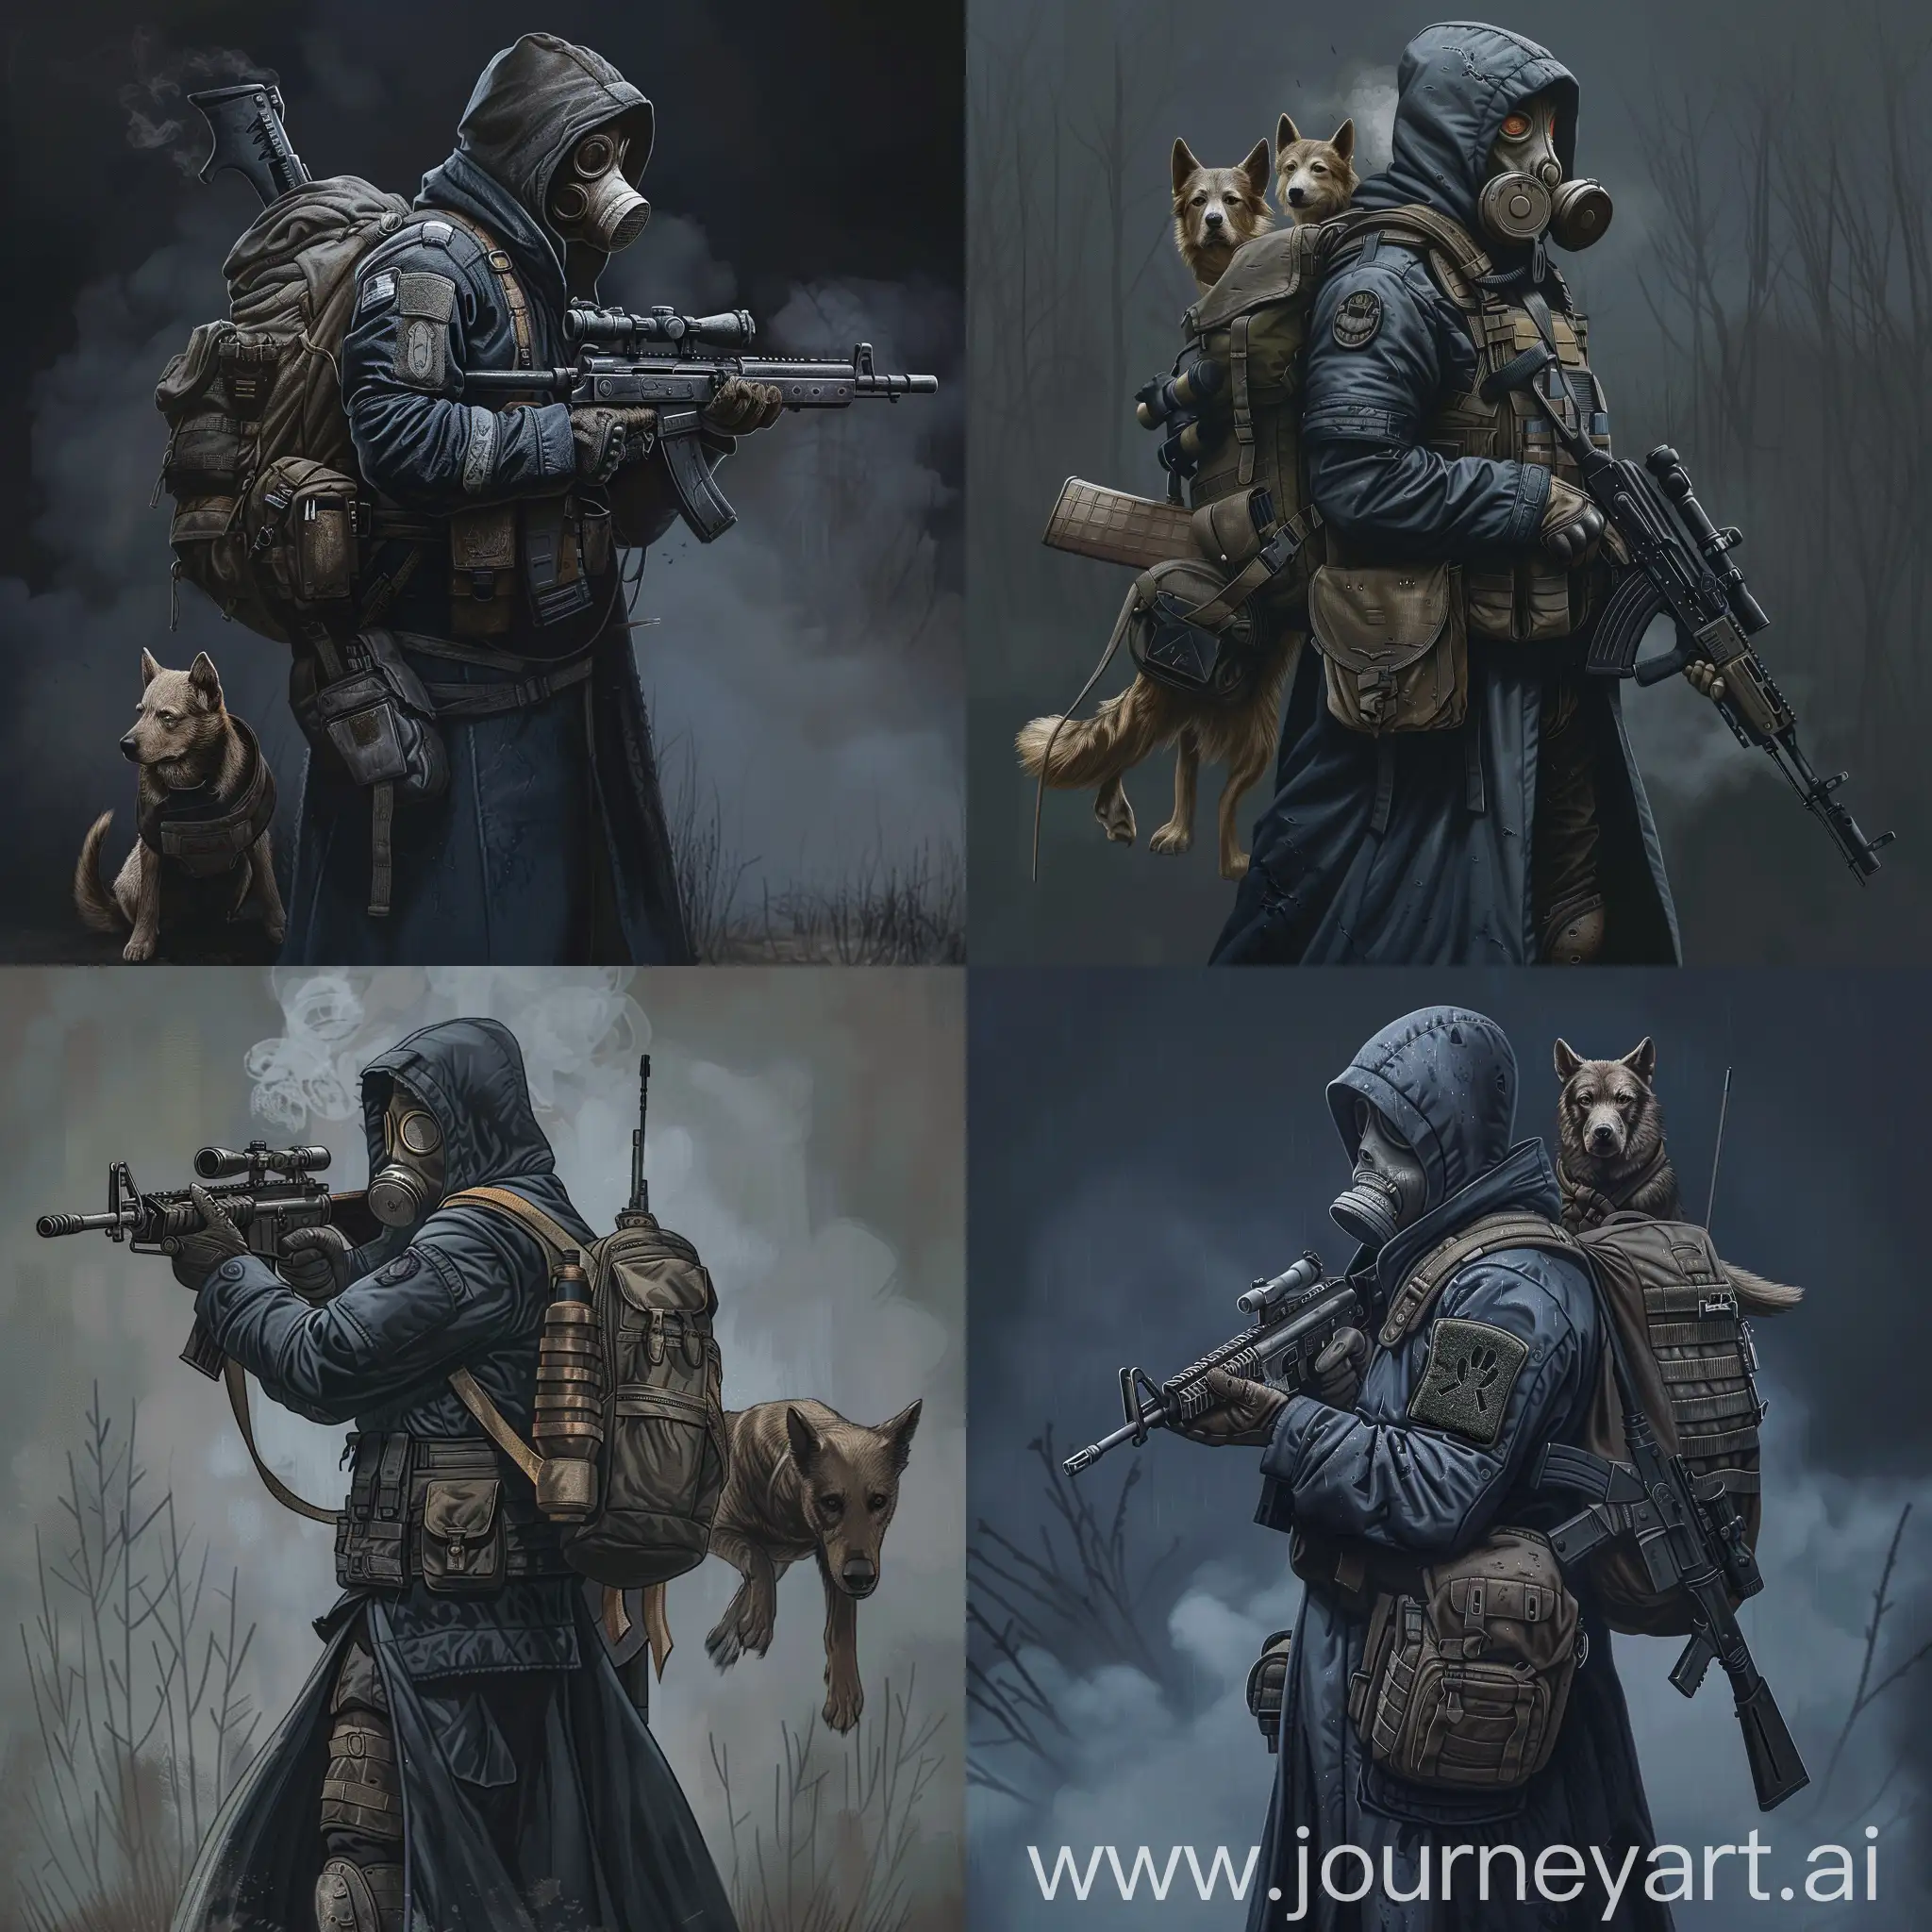 Digital design art a mercenary from the universe of S.T.A.L.K.E.R., dressed in a dark blue military raincoat, gray military armor on his body, a gasmask on his face, a military backpack on his back, a rifle in his hands, without dogs.